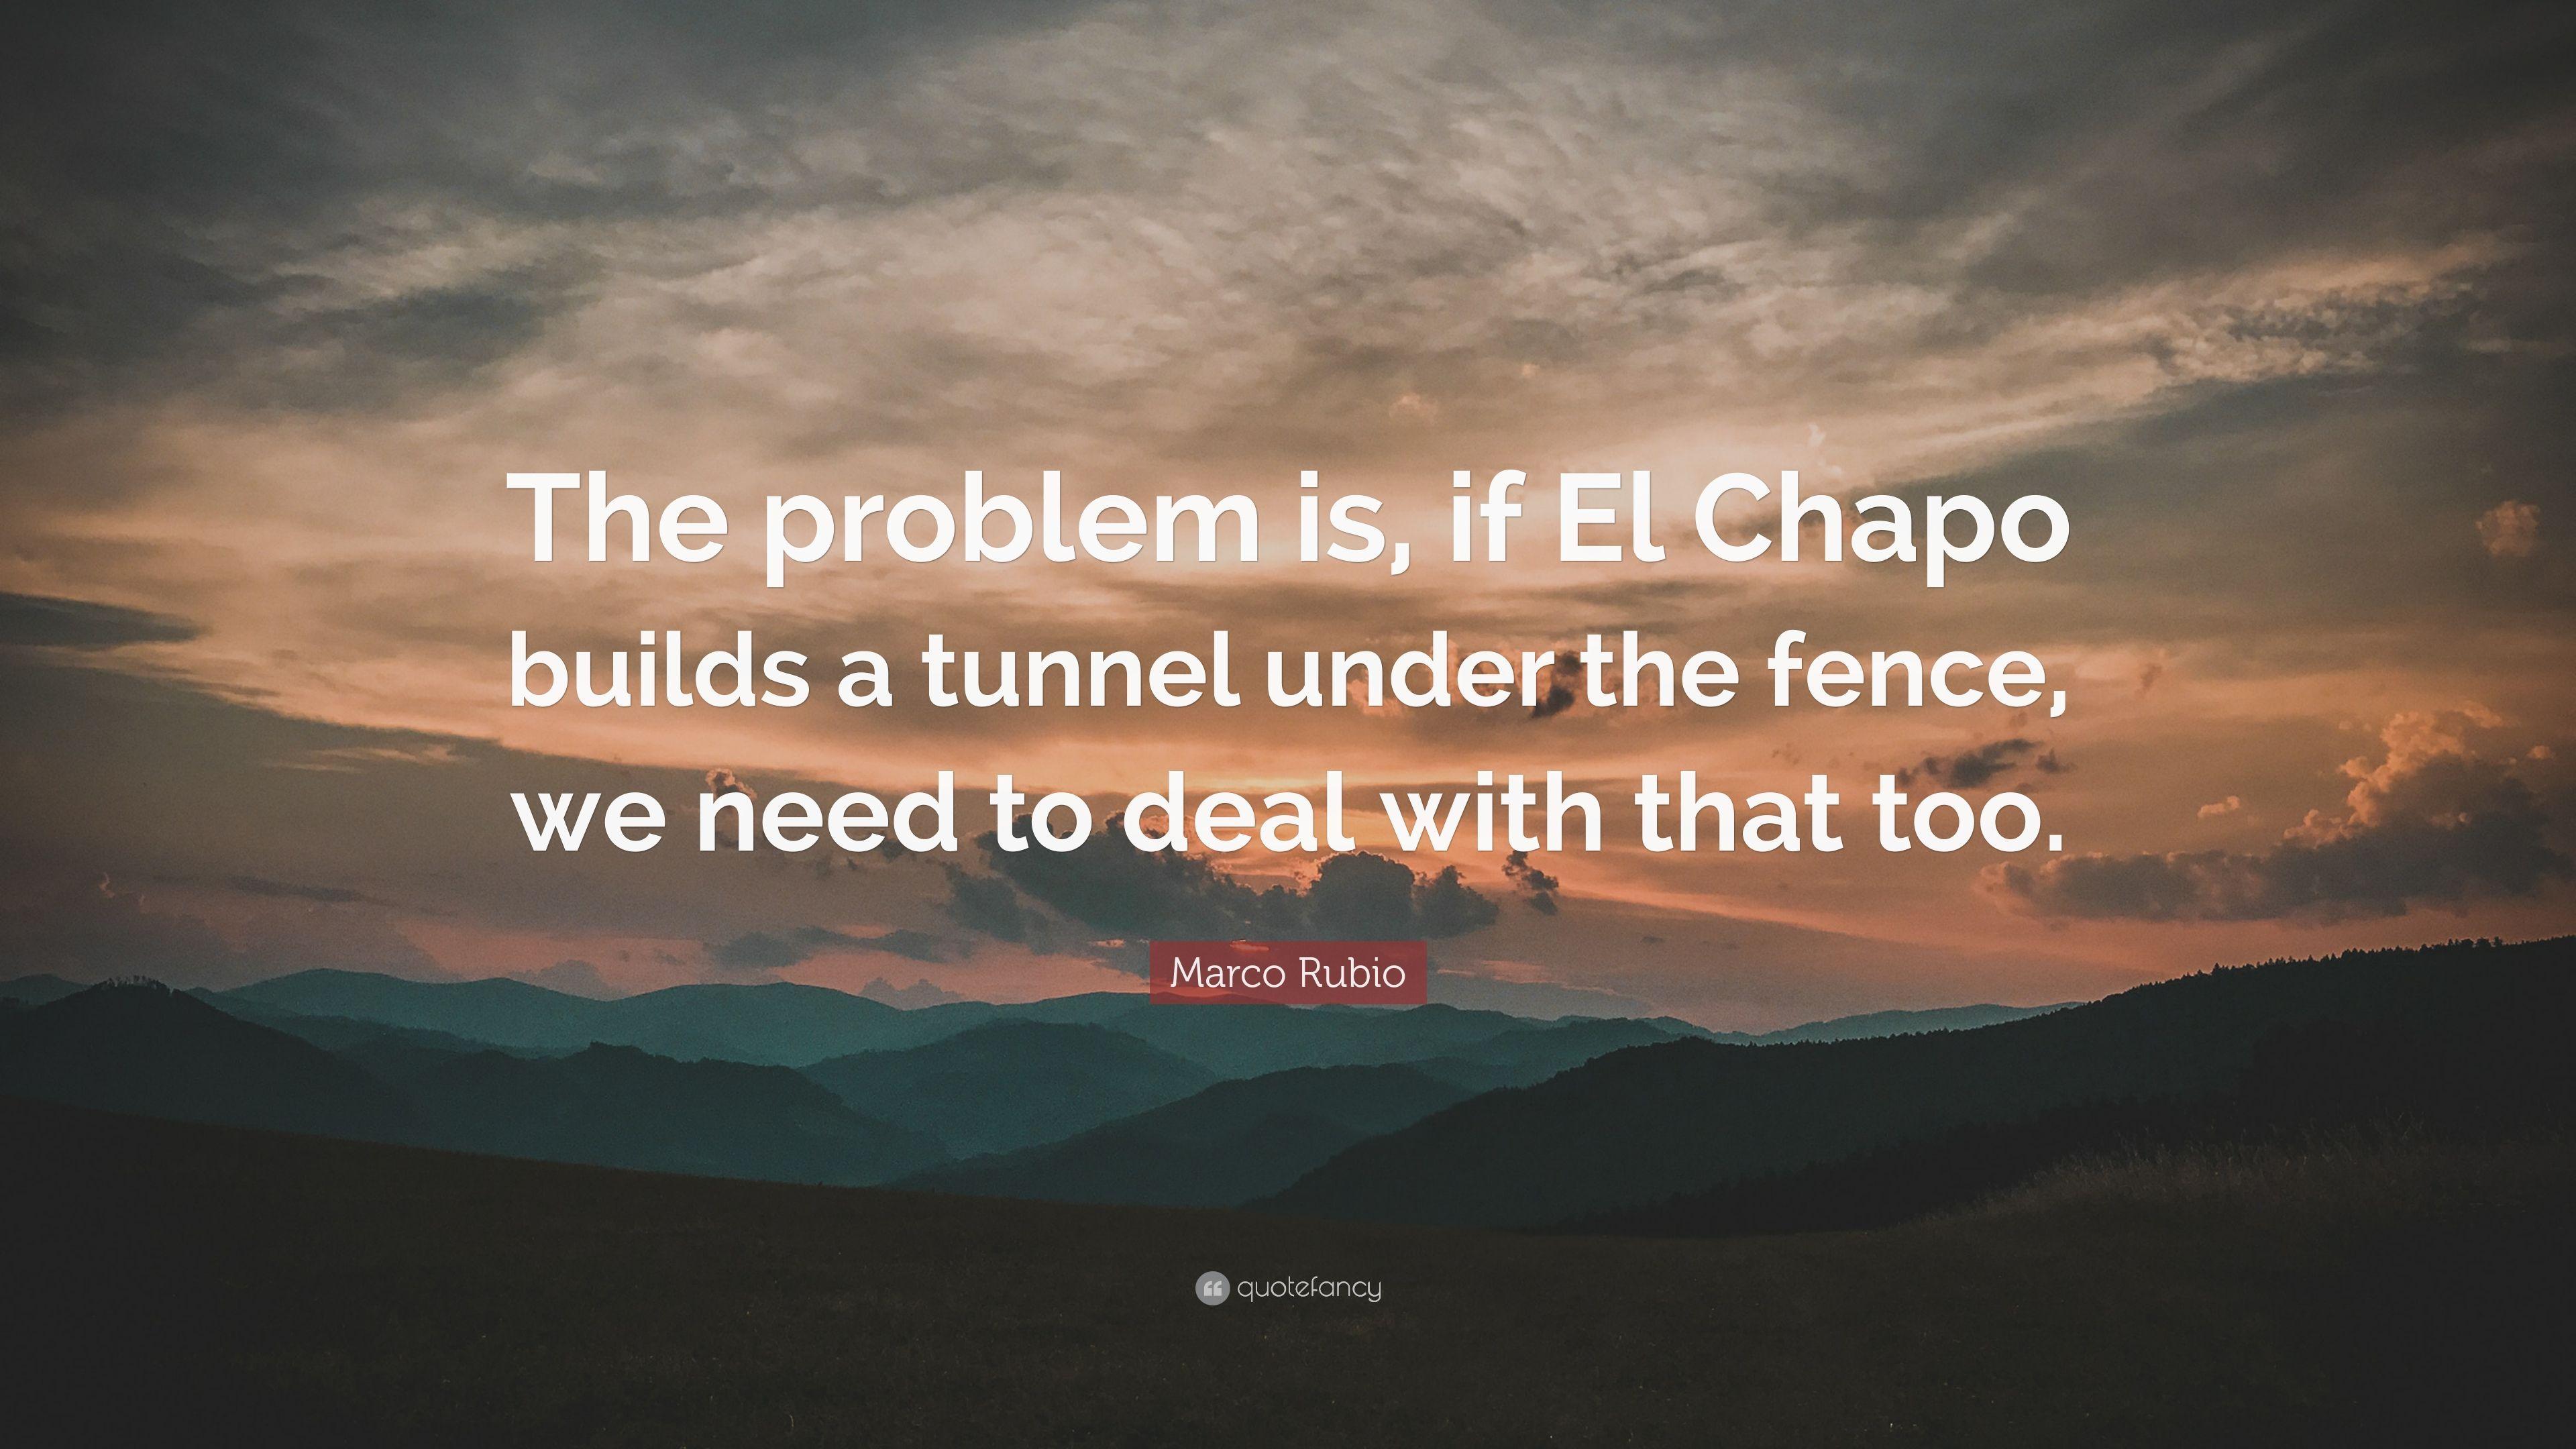 Marco Rubio Quote: “The problem is, if El Chapo builds a tunnel